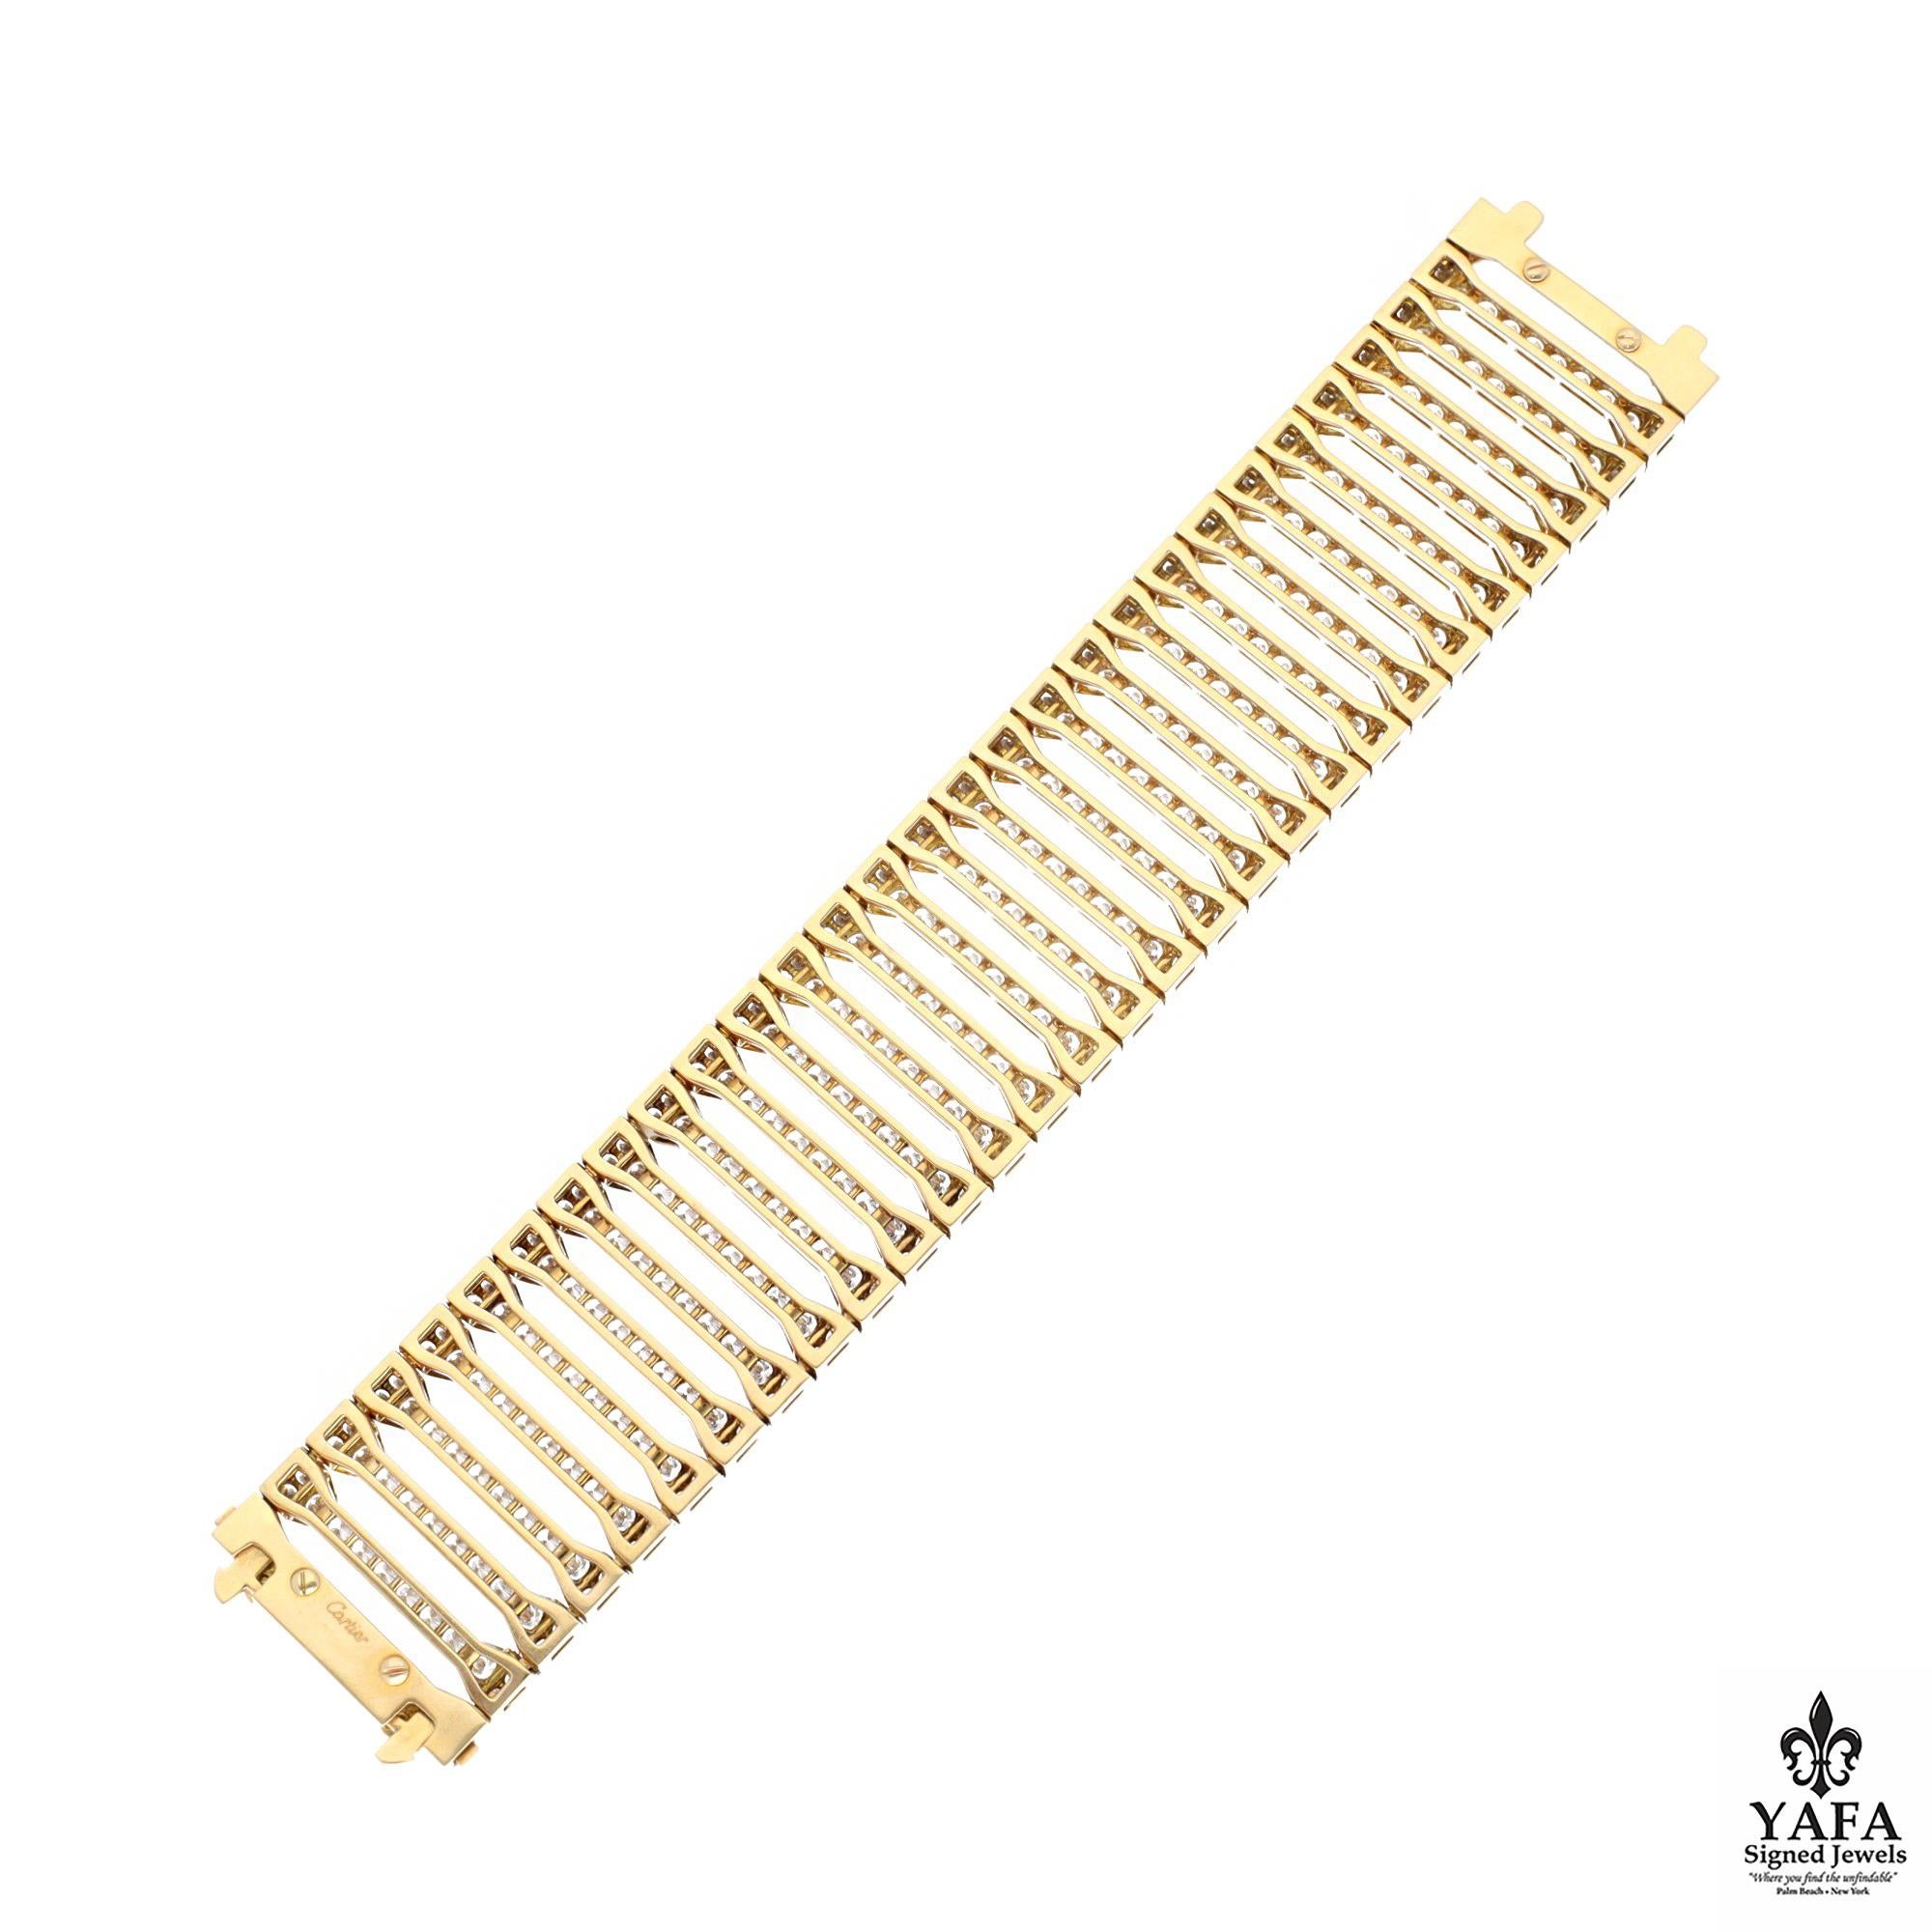 Cartier 'Anthalia' Yellow Gold Diamond Bracelet In Excellent Condition For Sale In New York, NY